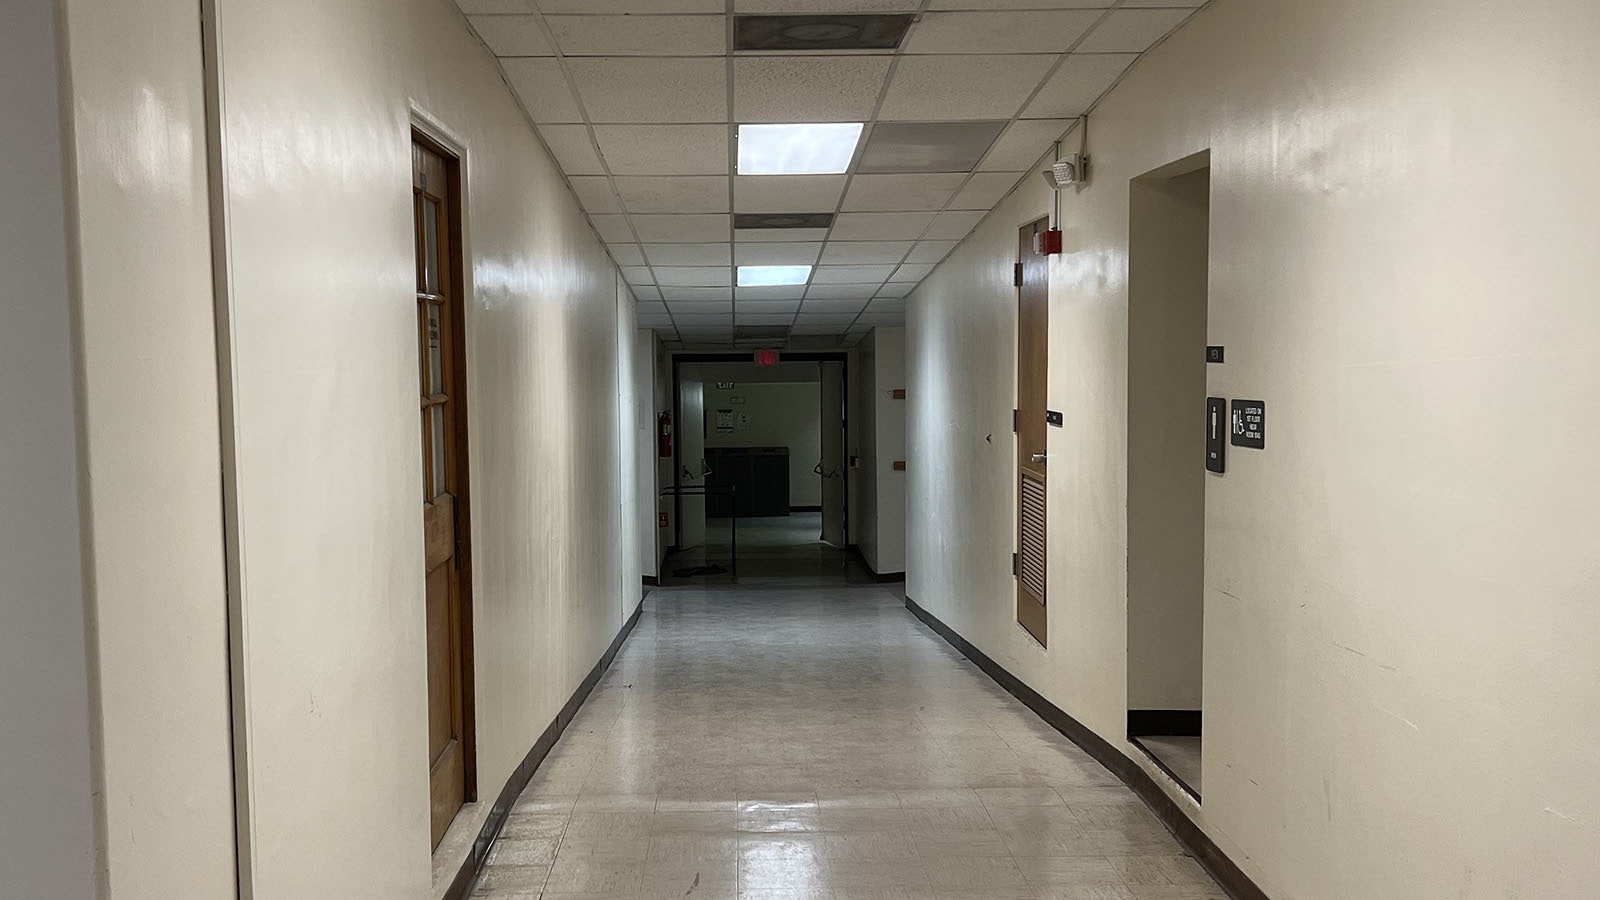 A labyrinth of halls and corridors remain in the basement level of the old engineering building on the University of Wyoming campus, where in the 1960s a tiny nuclear reactor was housed.